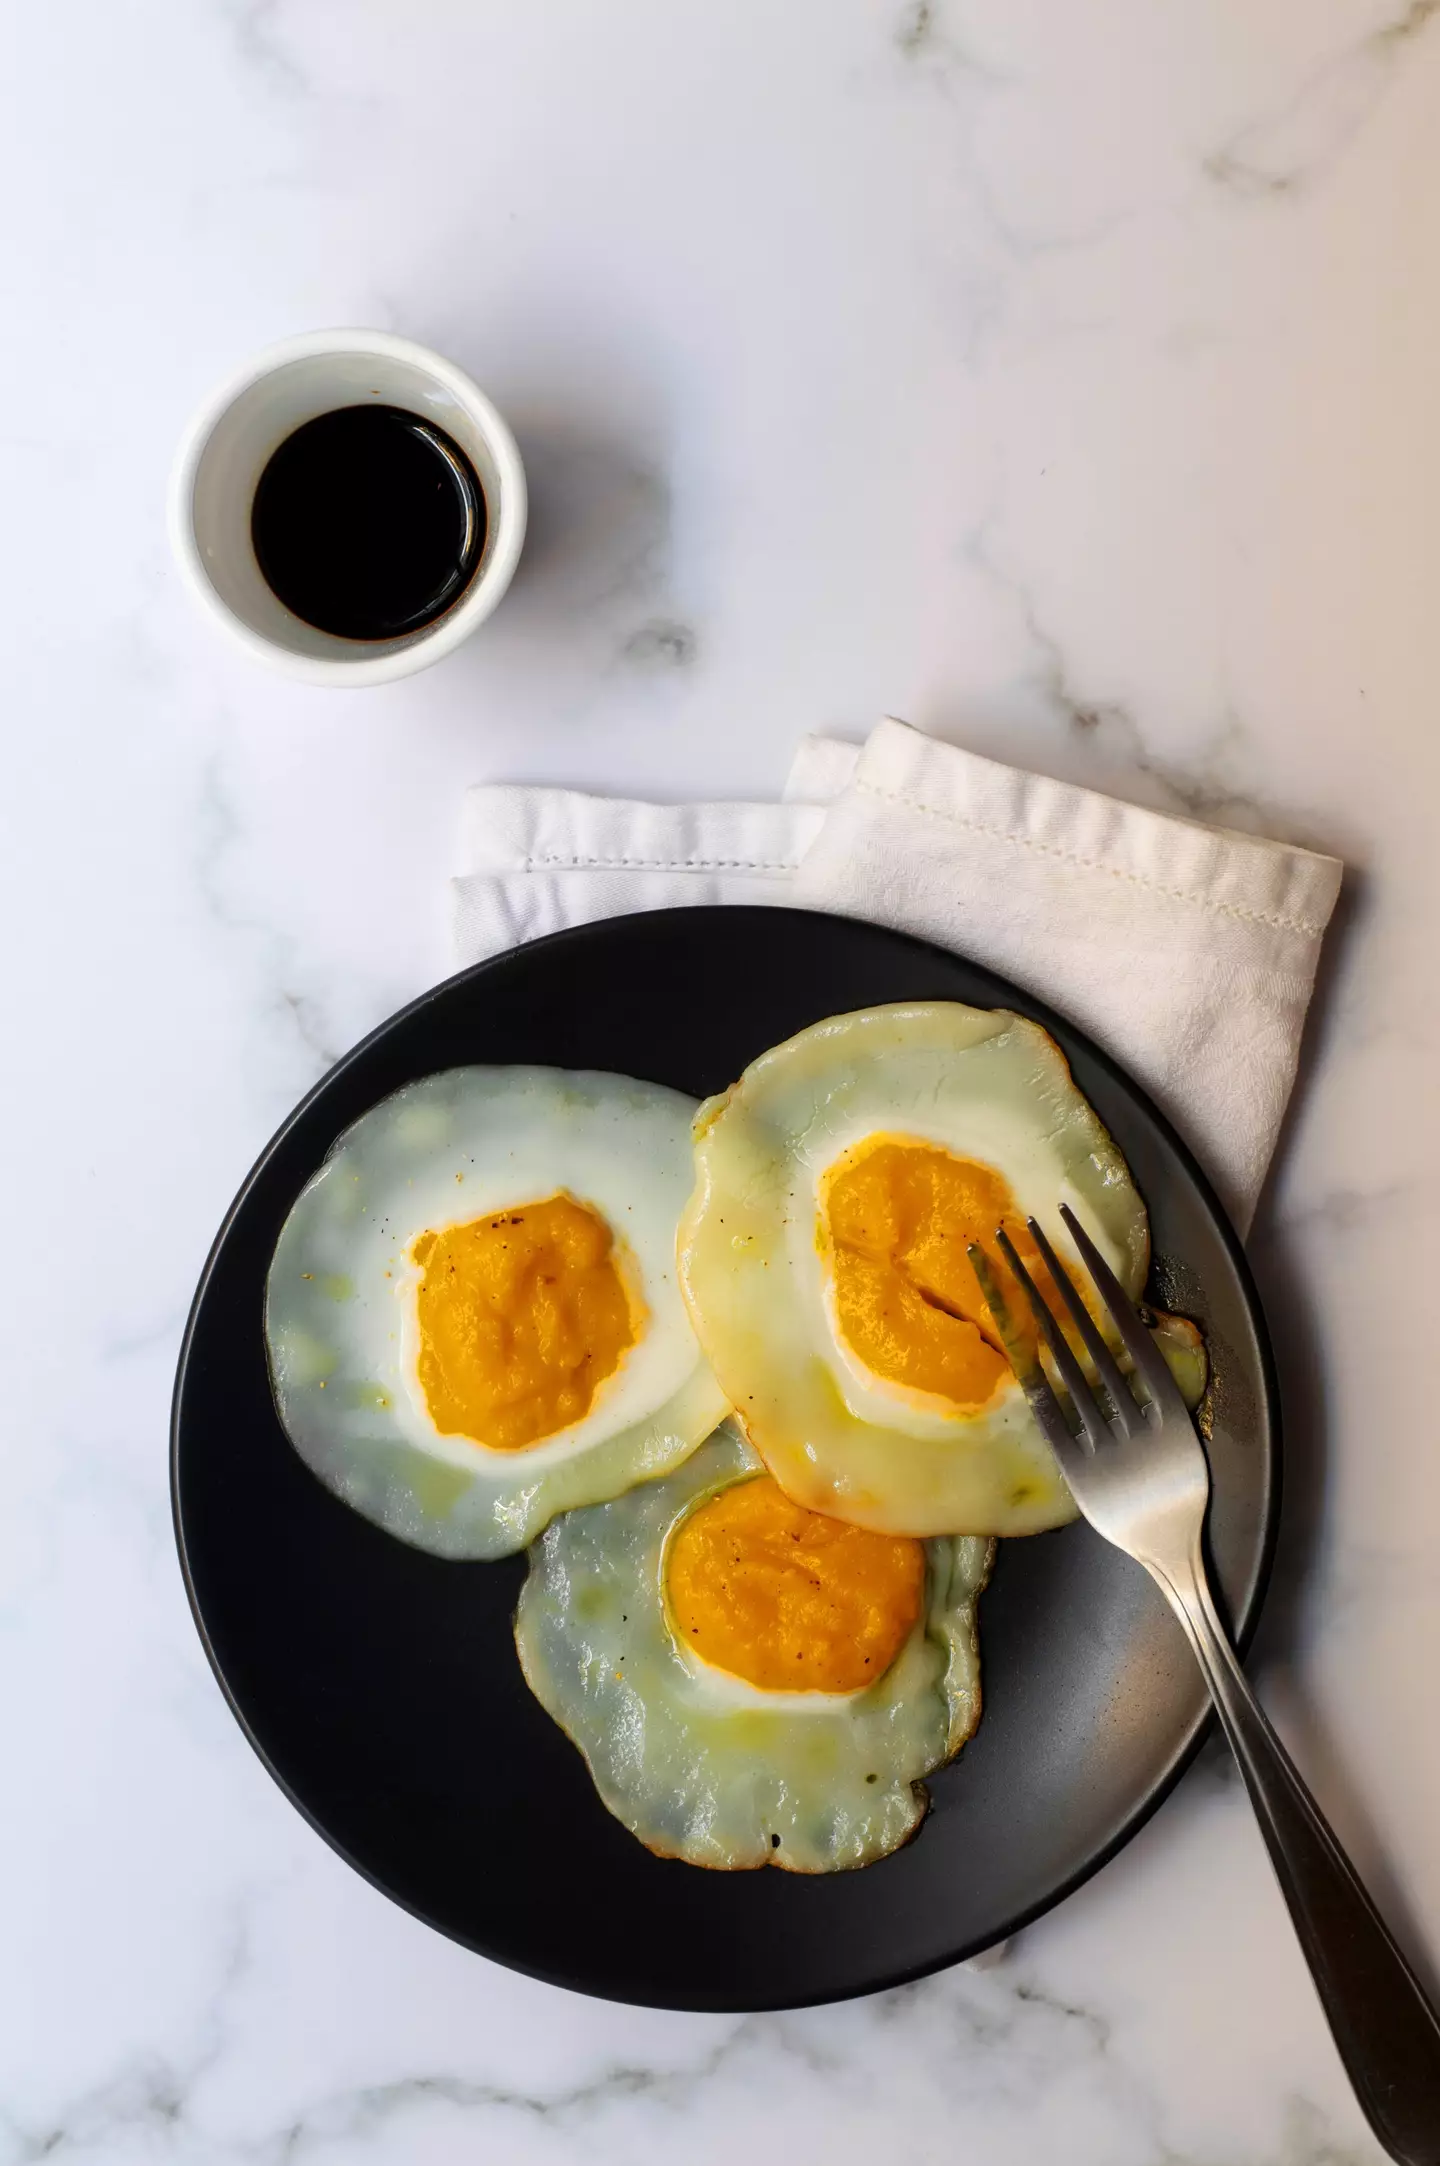 You can make your own vegan 'eggs' too (